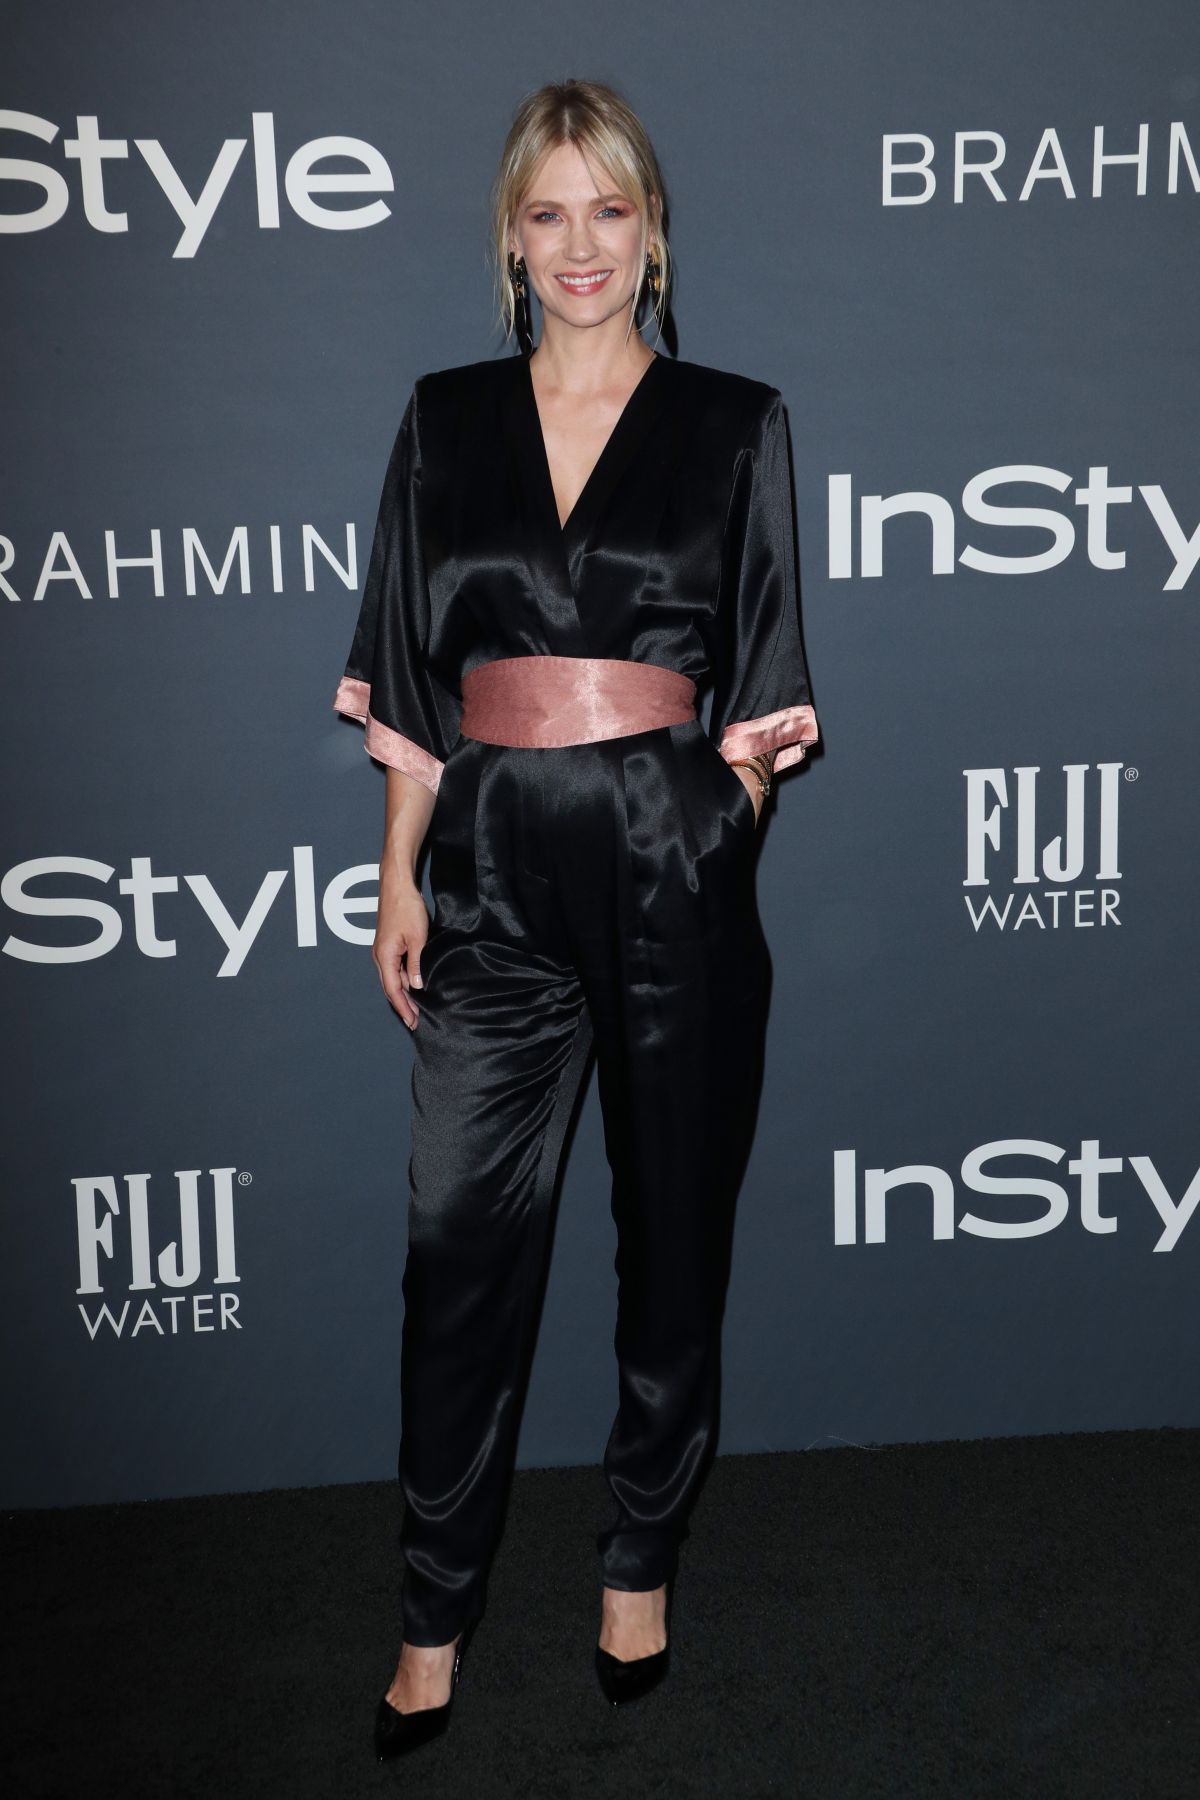 JANUARY JONES at 2017 Instyle Awards in Los Angeles 10/23/2017 – HawtCelebs